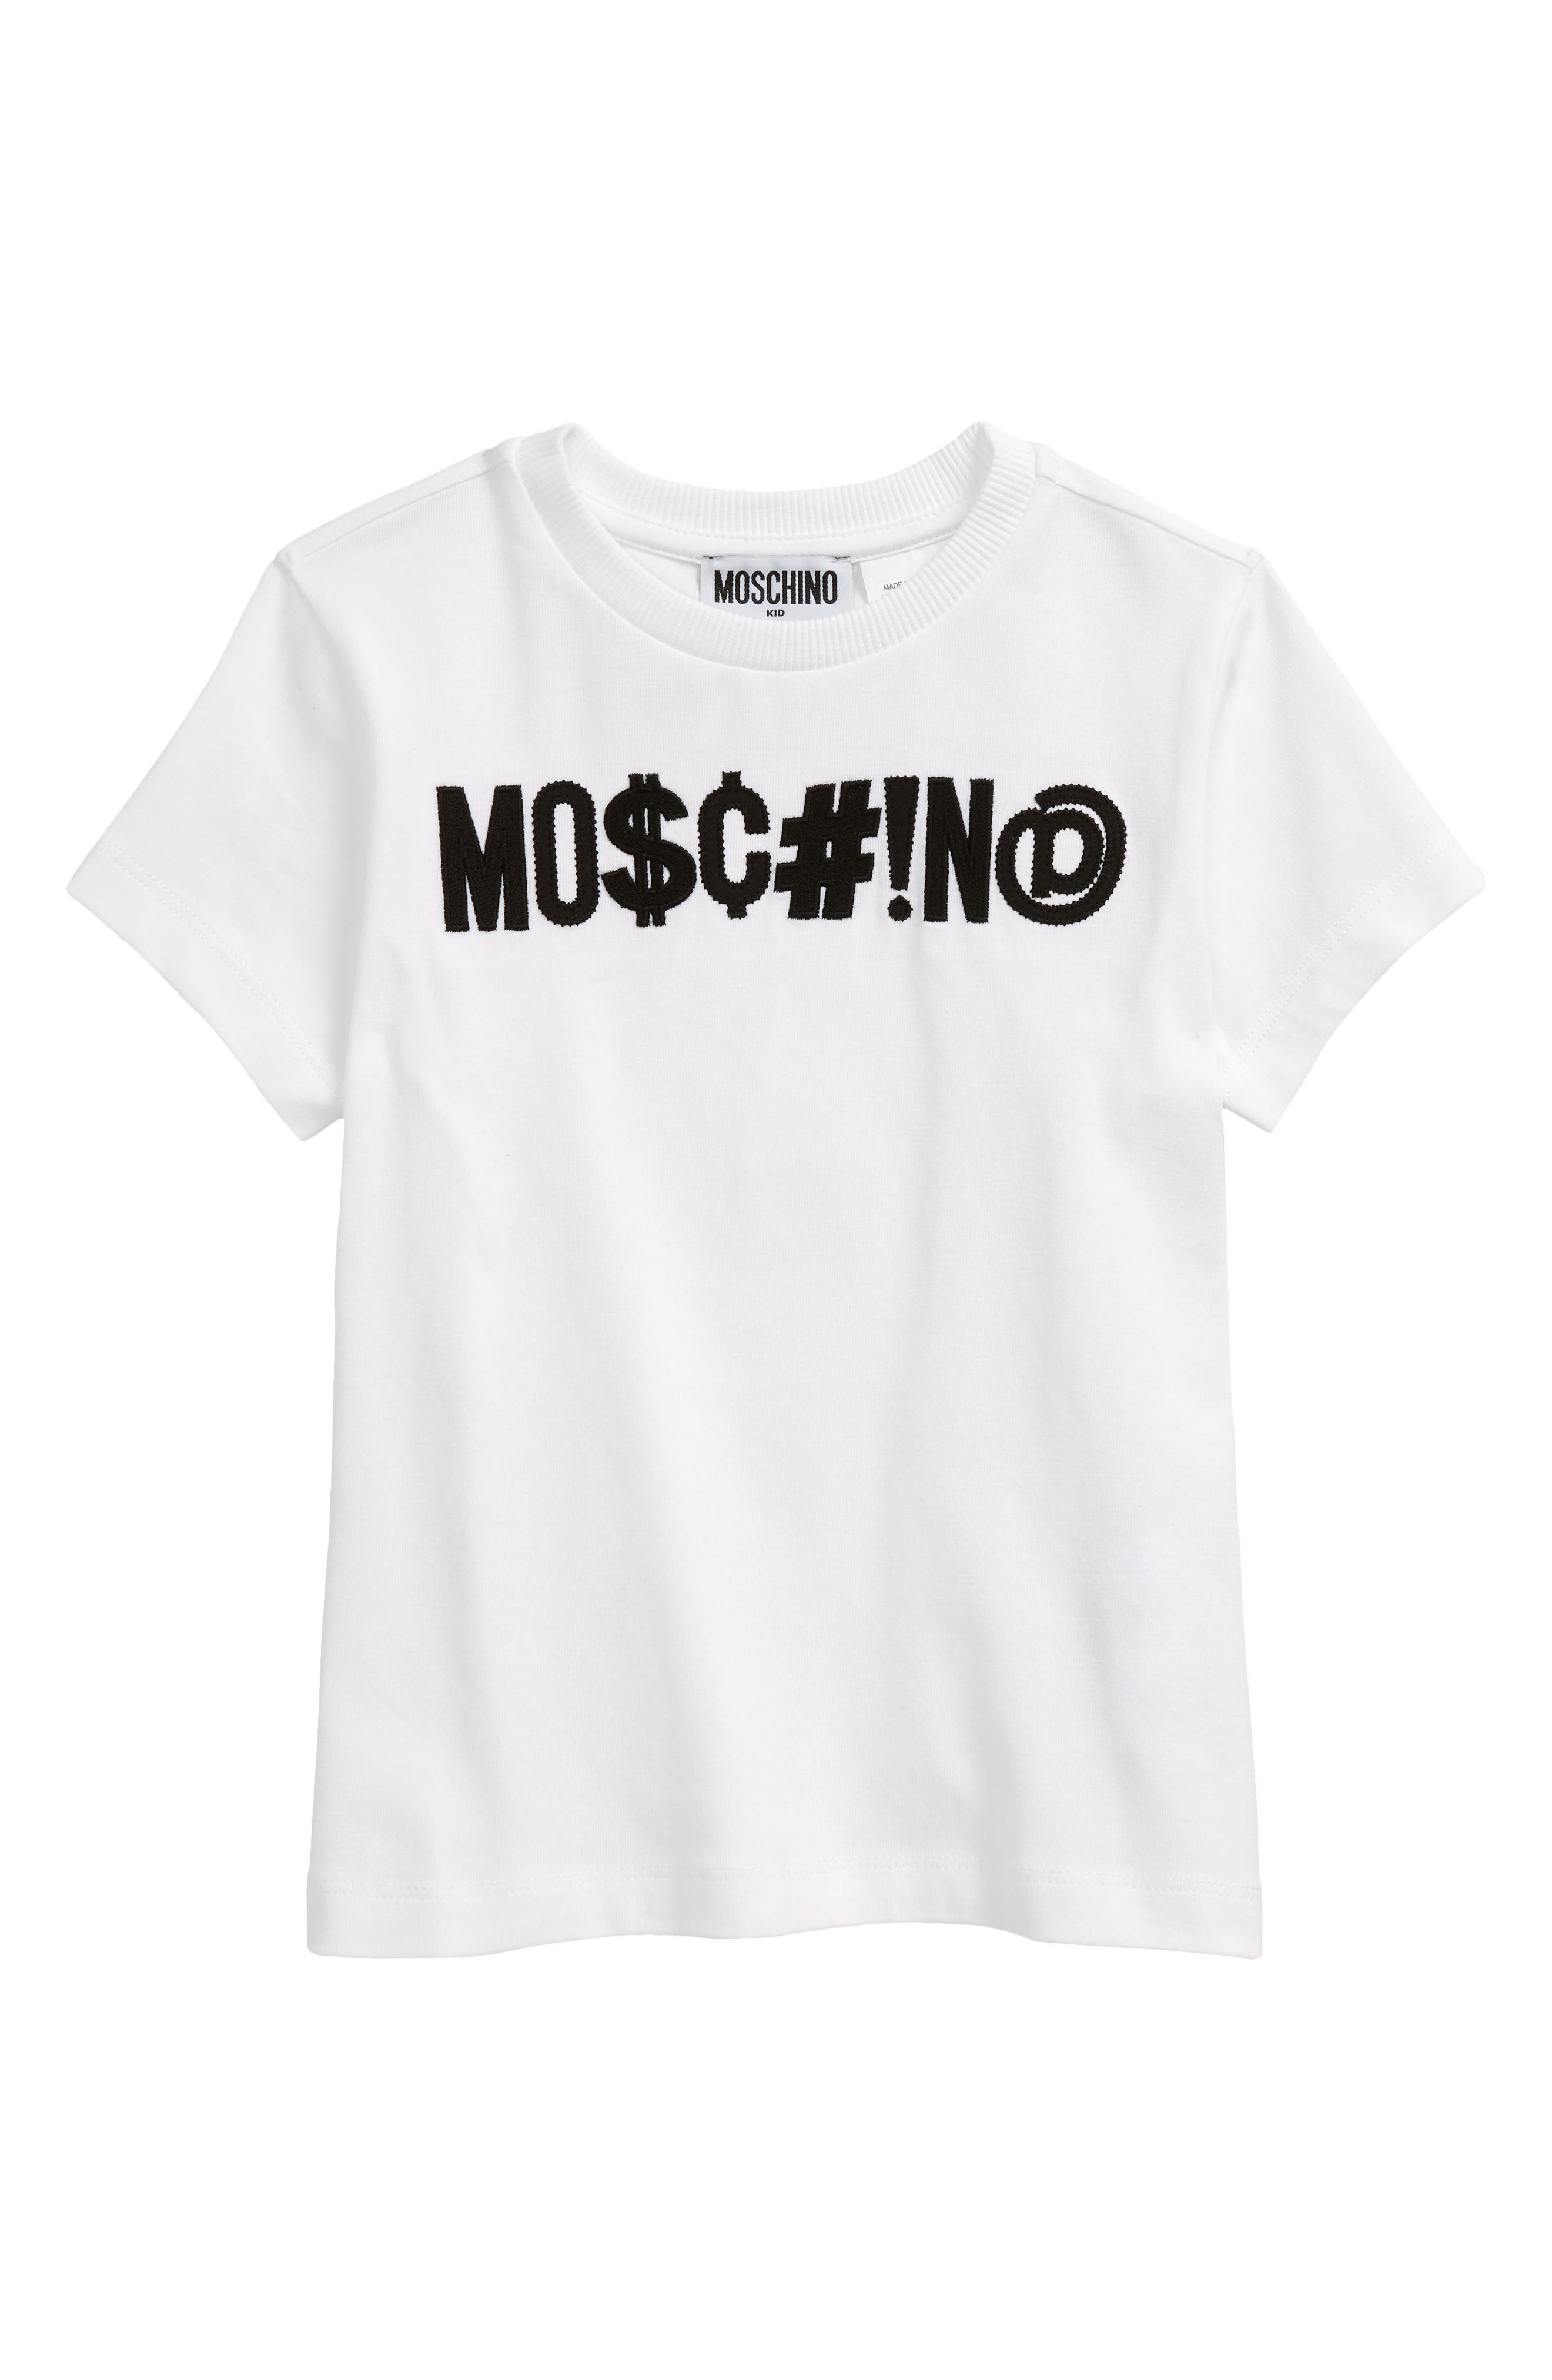 Moschino Kids' Symbol Logo Graphic Tee in Optic White at Nordstrom, Size 4Y Us